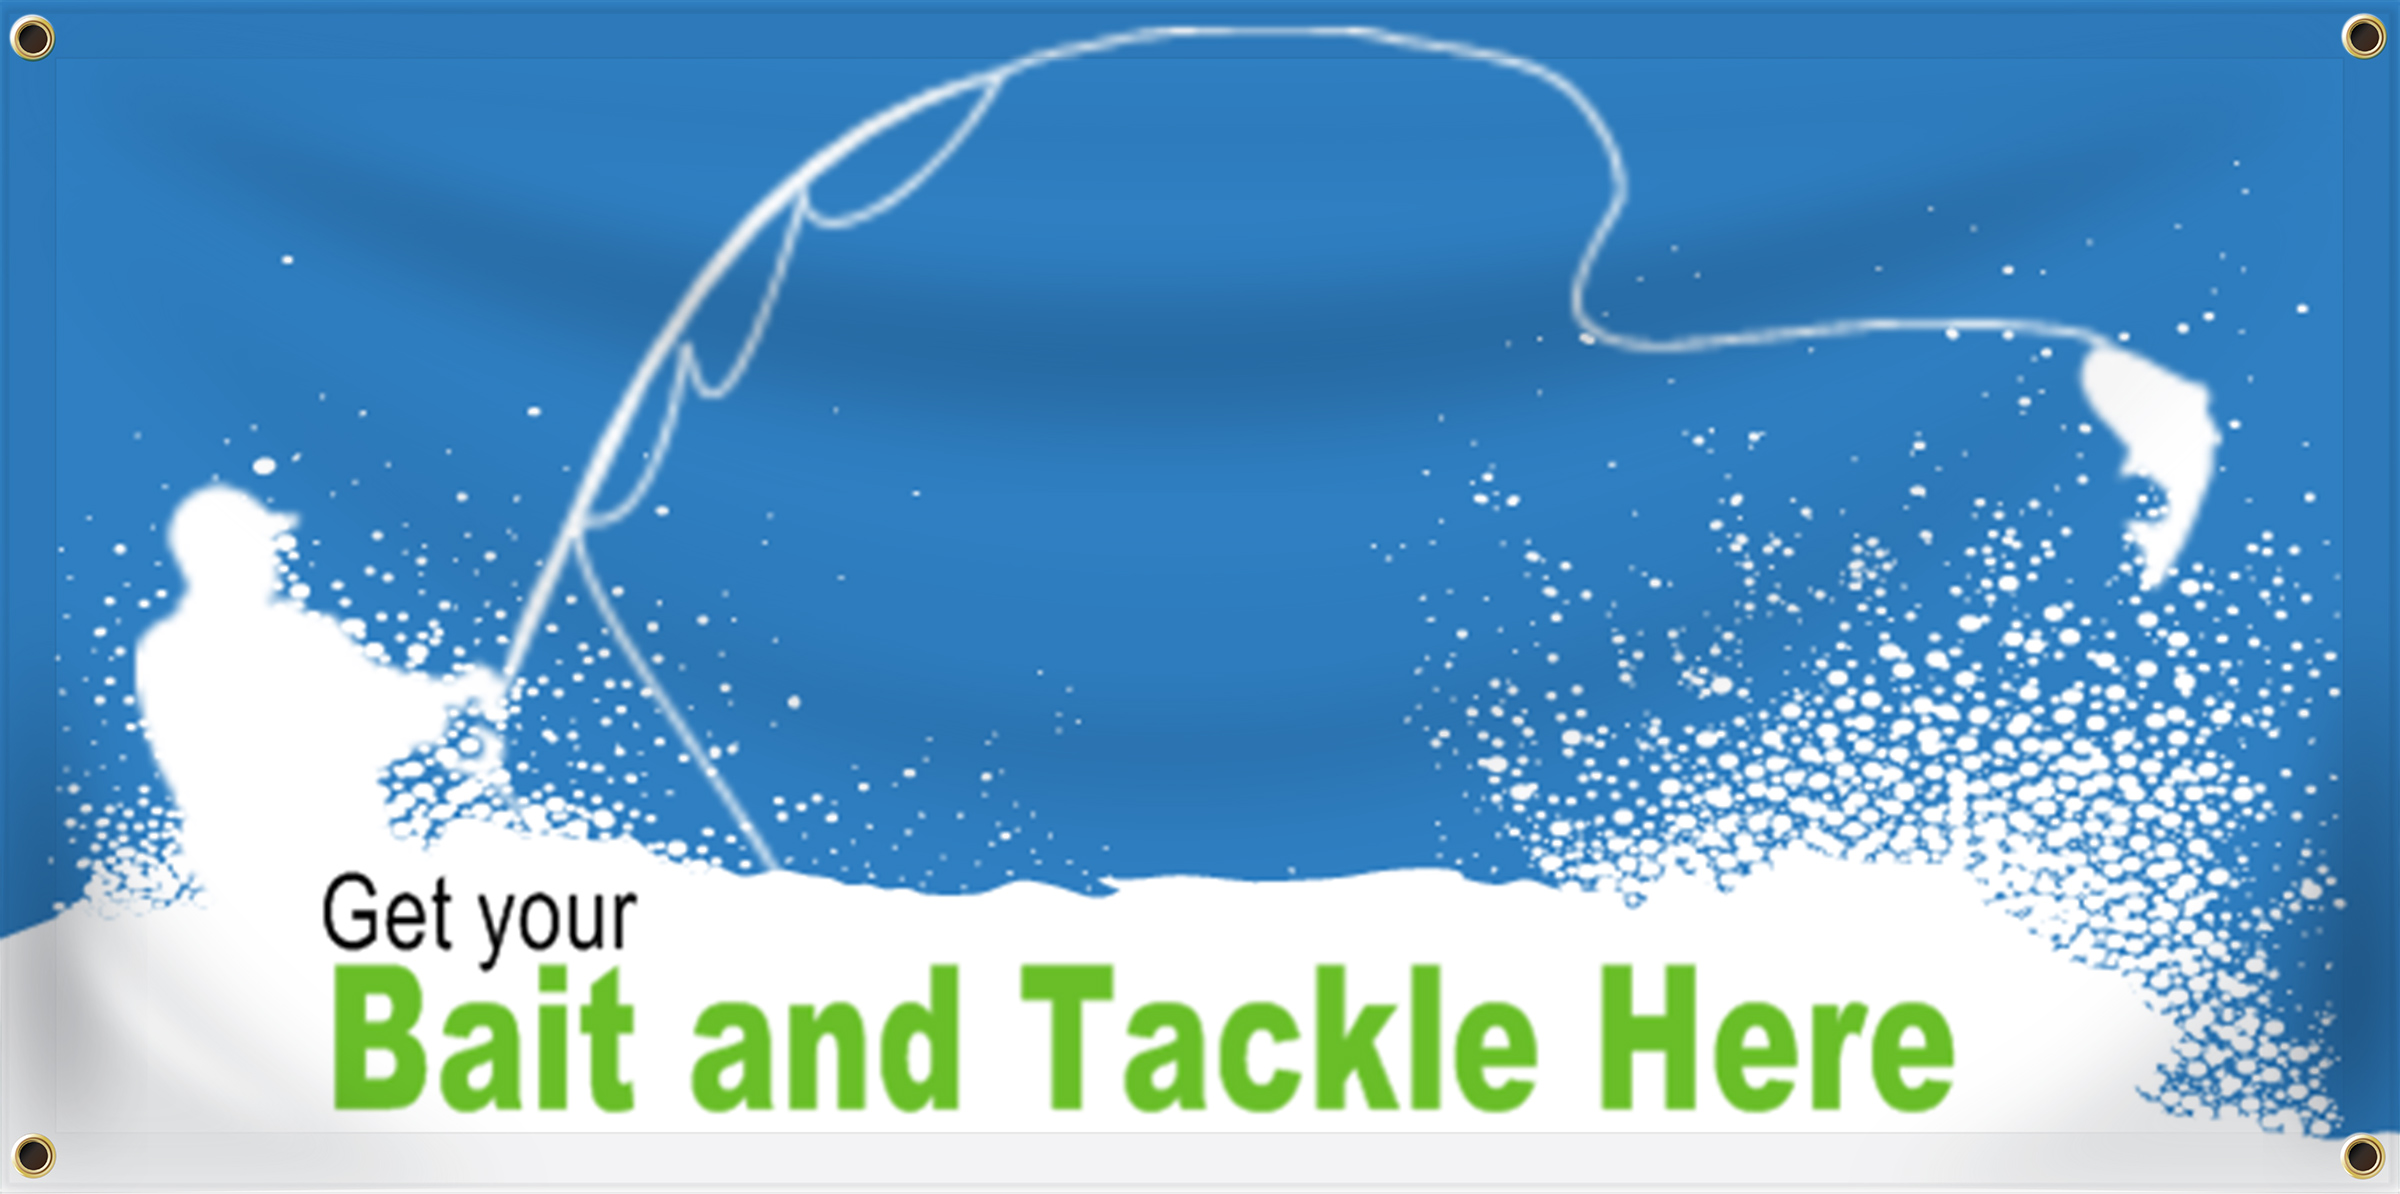 Bait and Tackle Banner Ideas | LawnSigns.com